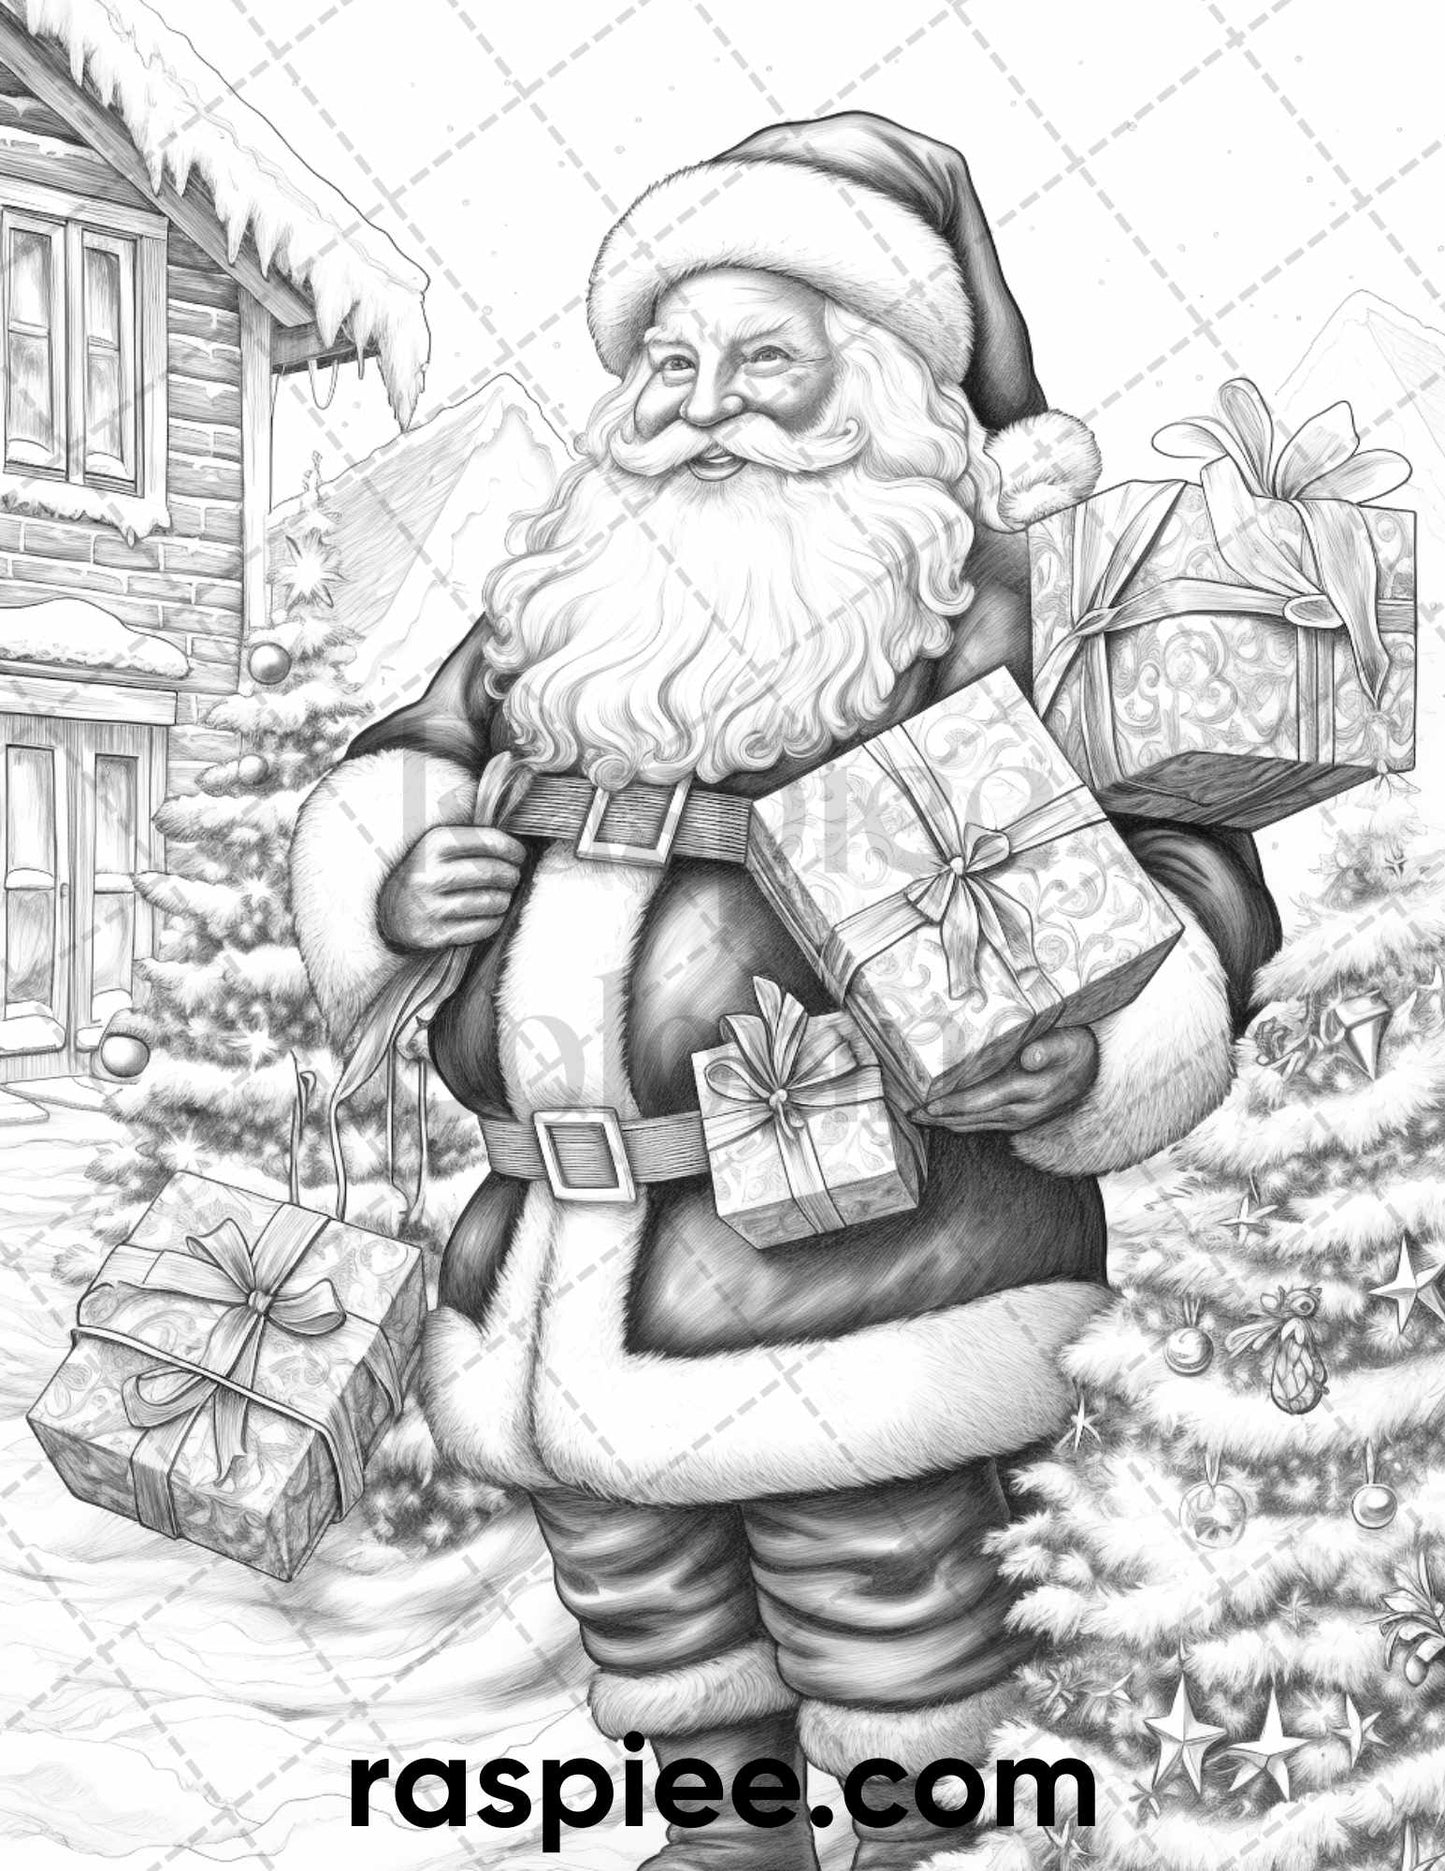 60 Merry Christmas Grayscale Coloring Pages Printable for Adult, Holiday Relaxation Art, PDF File Instant Download